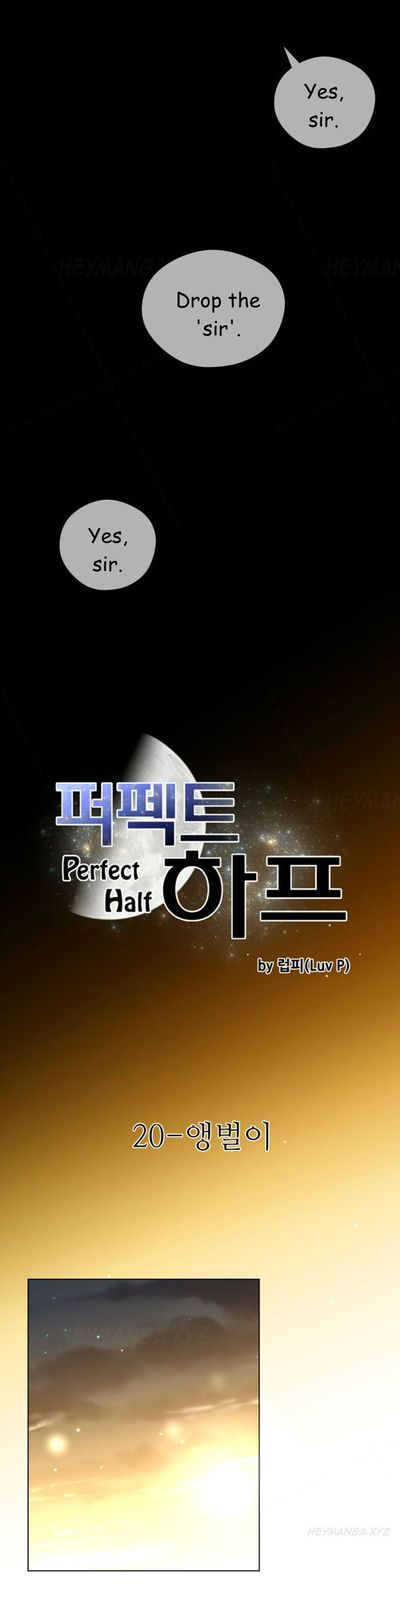 Perfect Half Ch.1-27  (Ongoing) - part 28